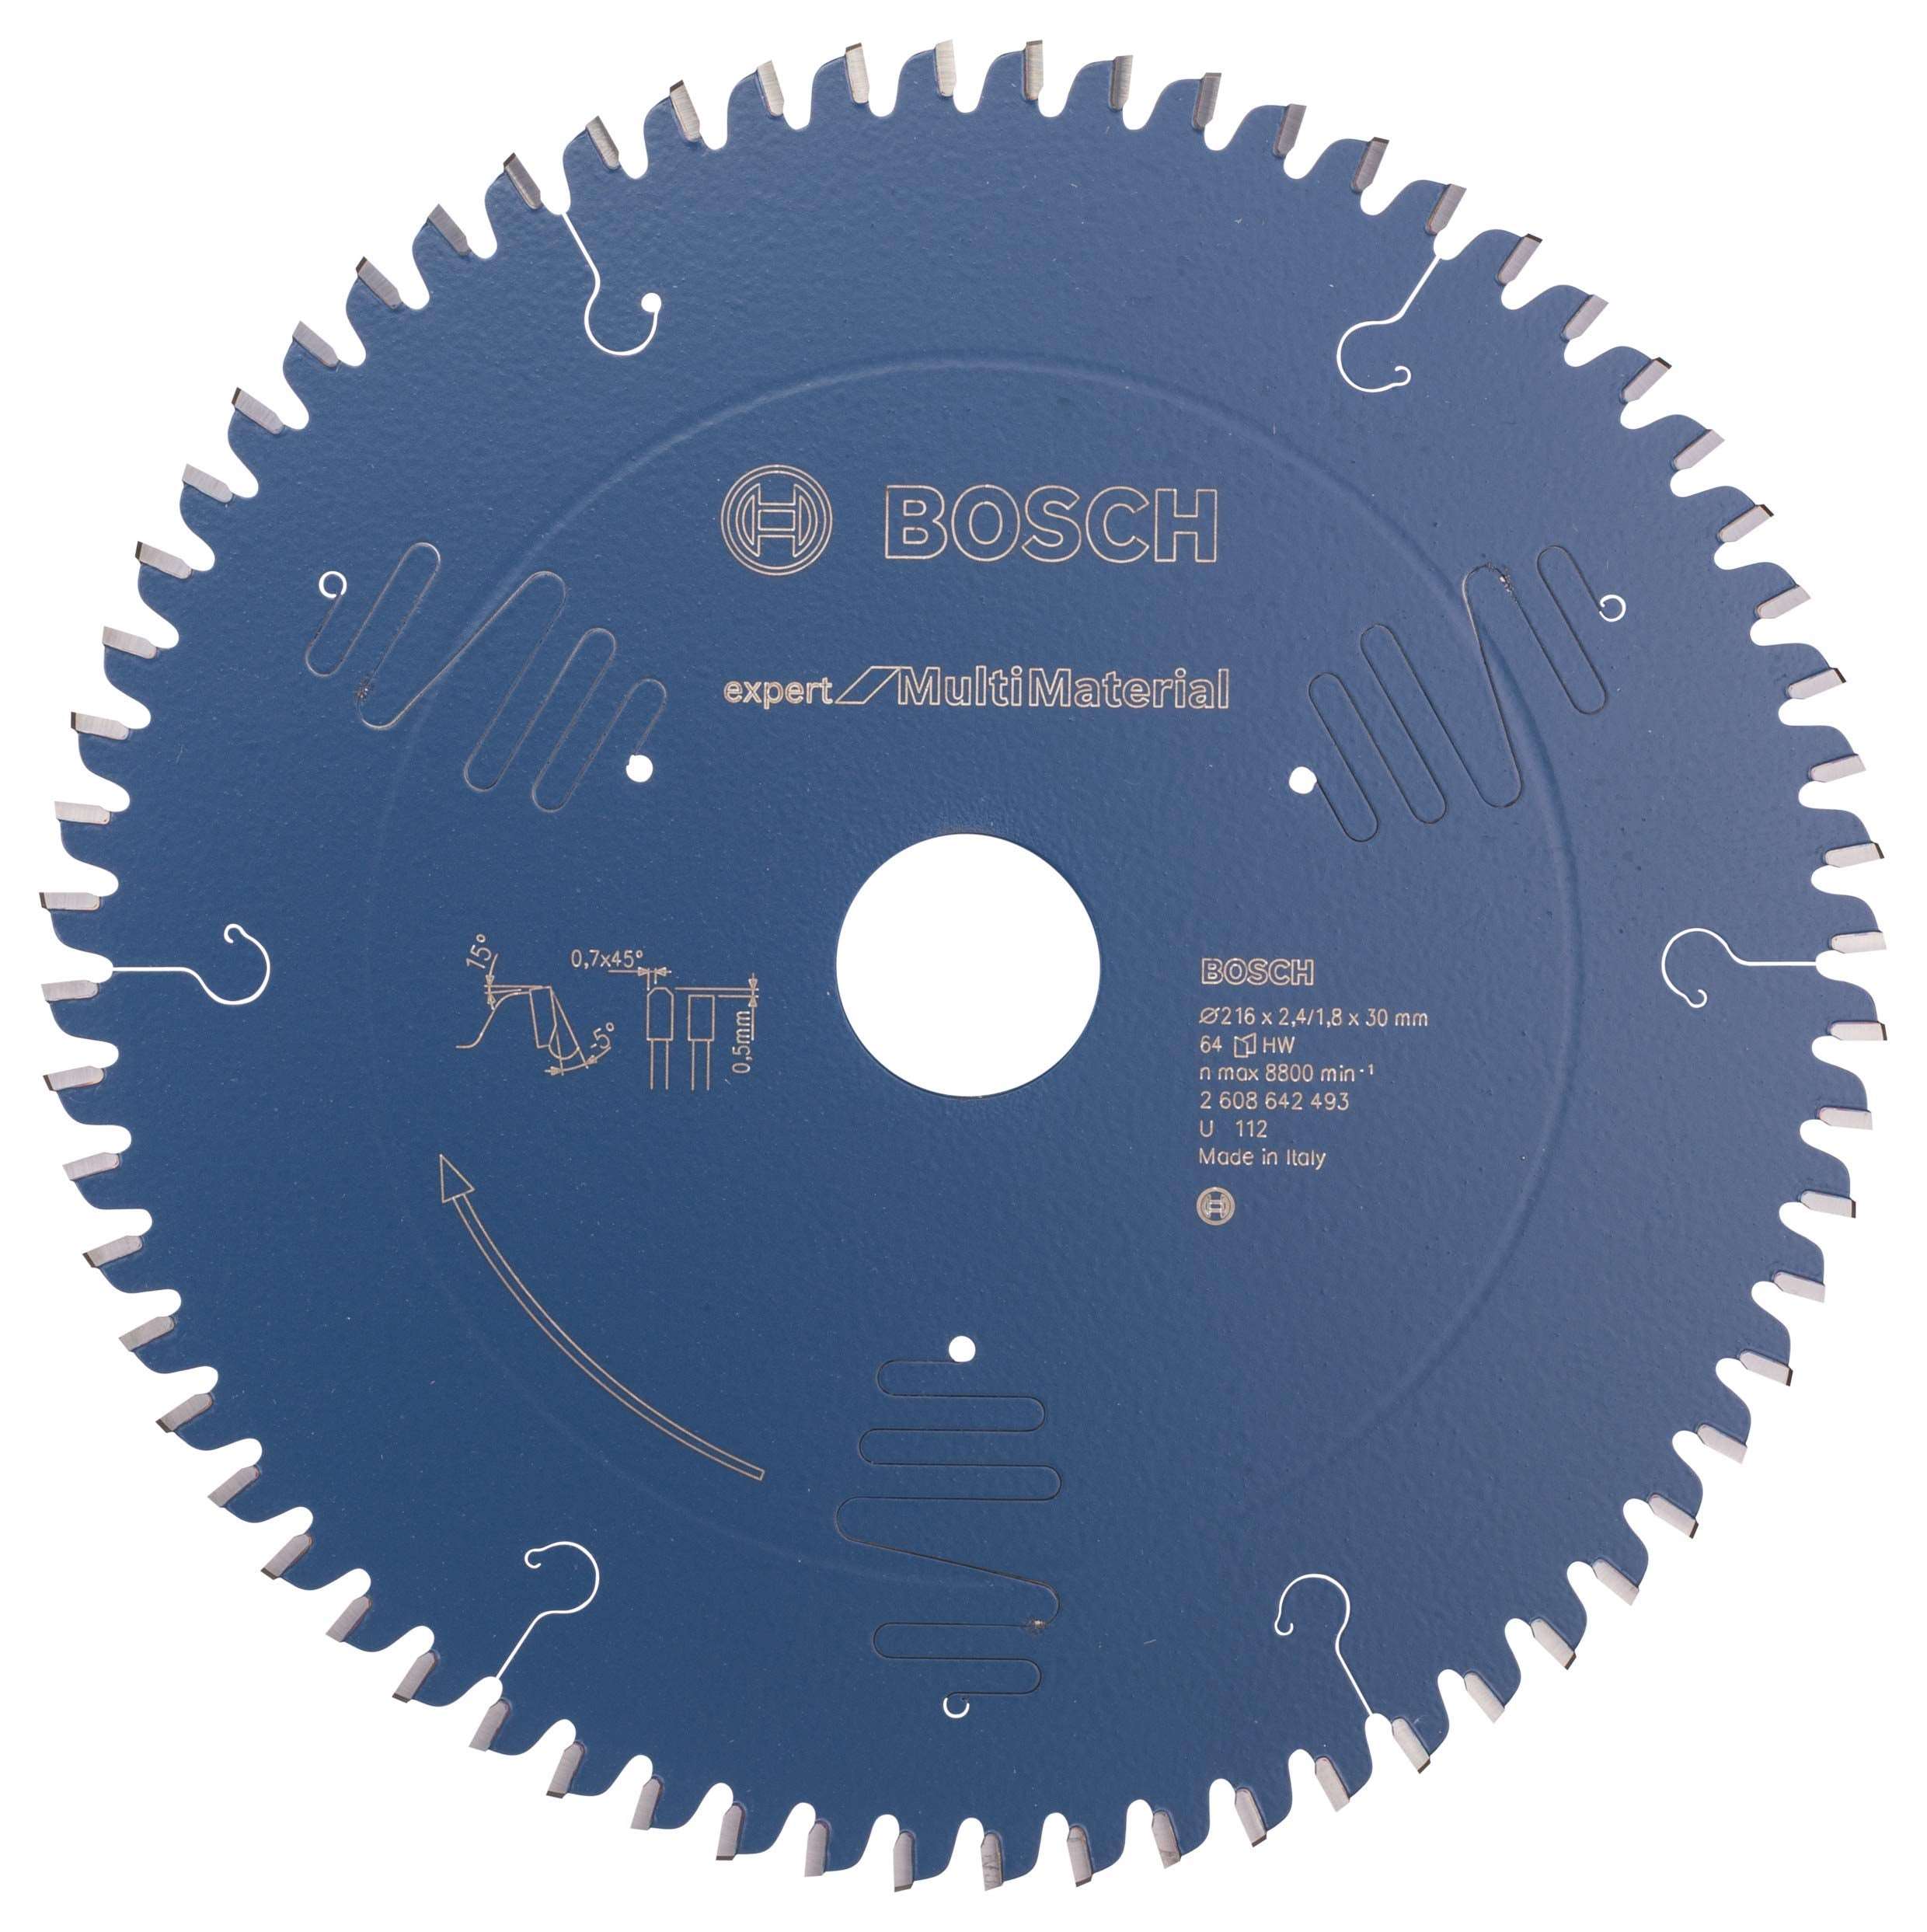 Bosch Expert Circular Saw Blade for Multi Material 216 x 30 x 2,4 mm, 64 2608642493 Power Tool Services